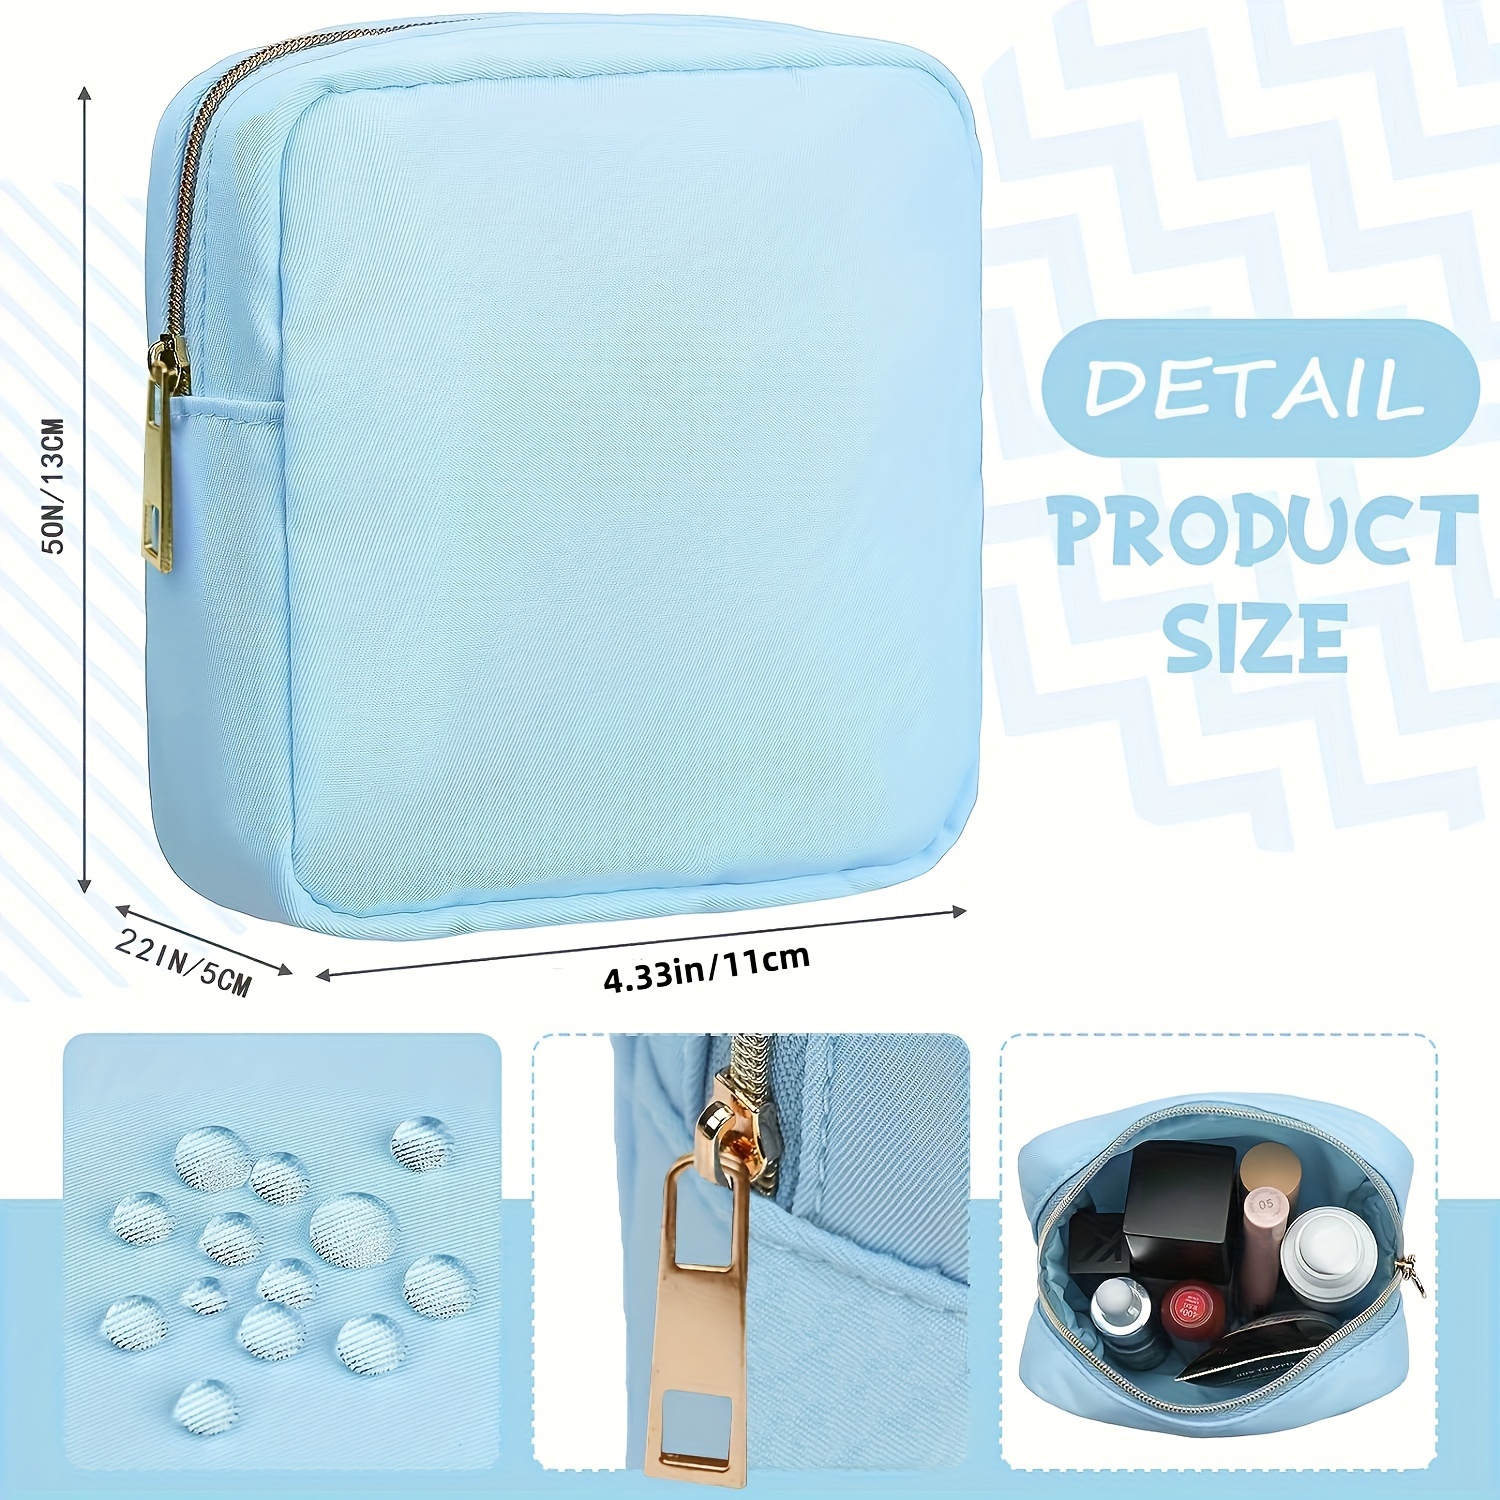 Nylon Mini Makeup Bag For Purse, Preppy Small Cute Makeup Bag Cosmetic  Zipper Pouch Purse, Waterproof Travel Coin Pouch Sanitary Napkin Storage  Bag